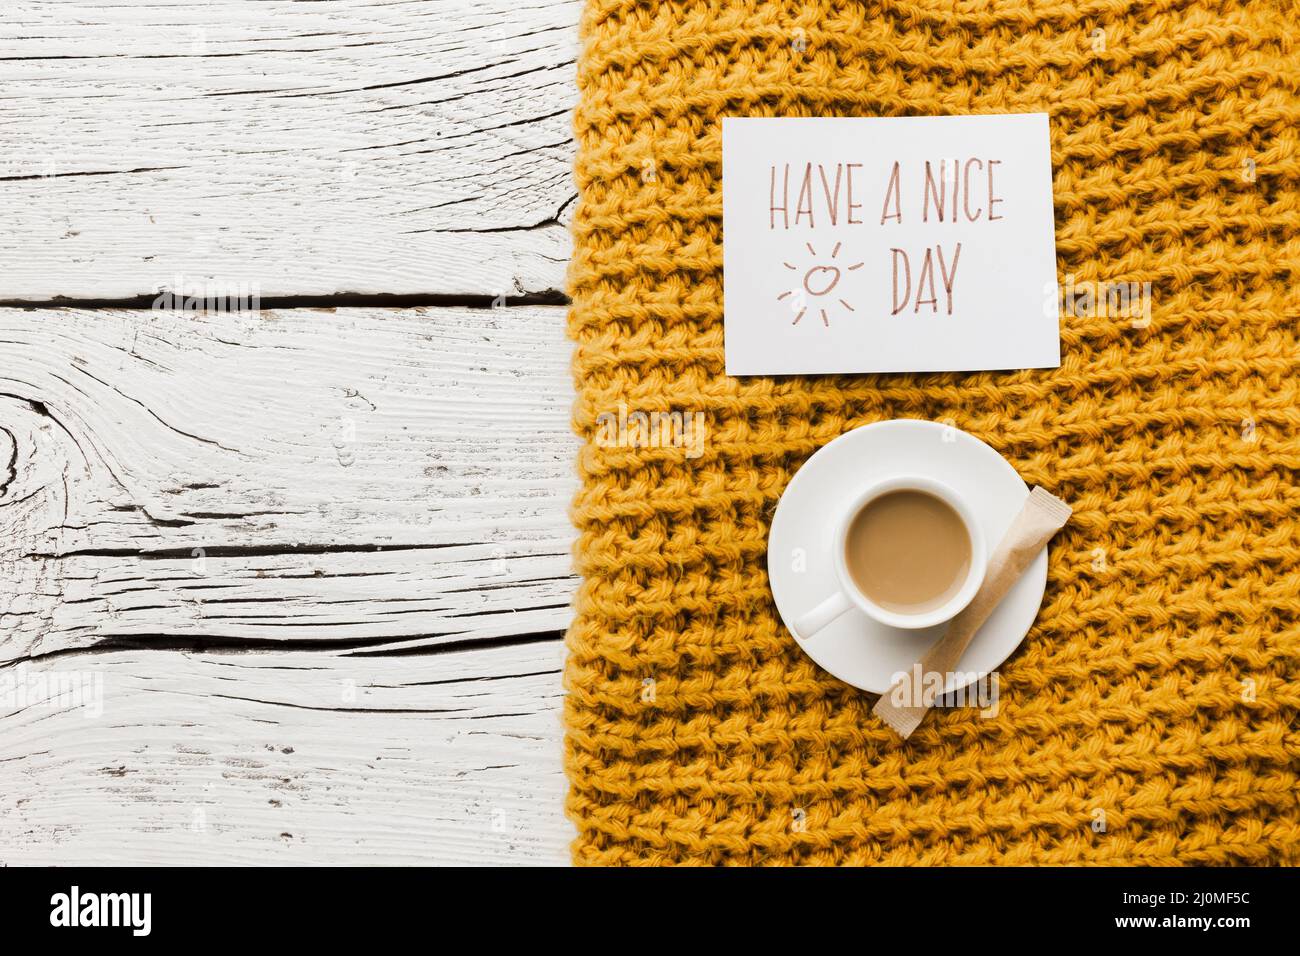 Have nice day message with cup coffee Stock Photo